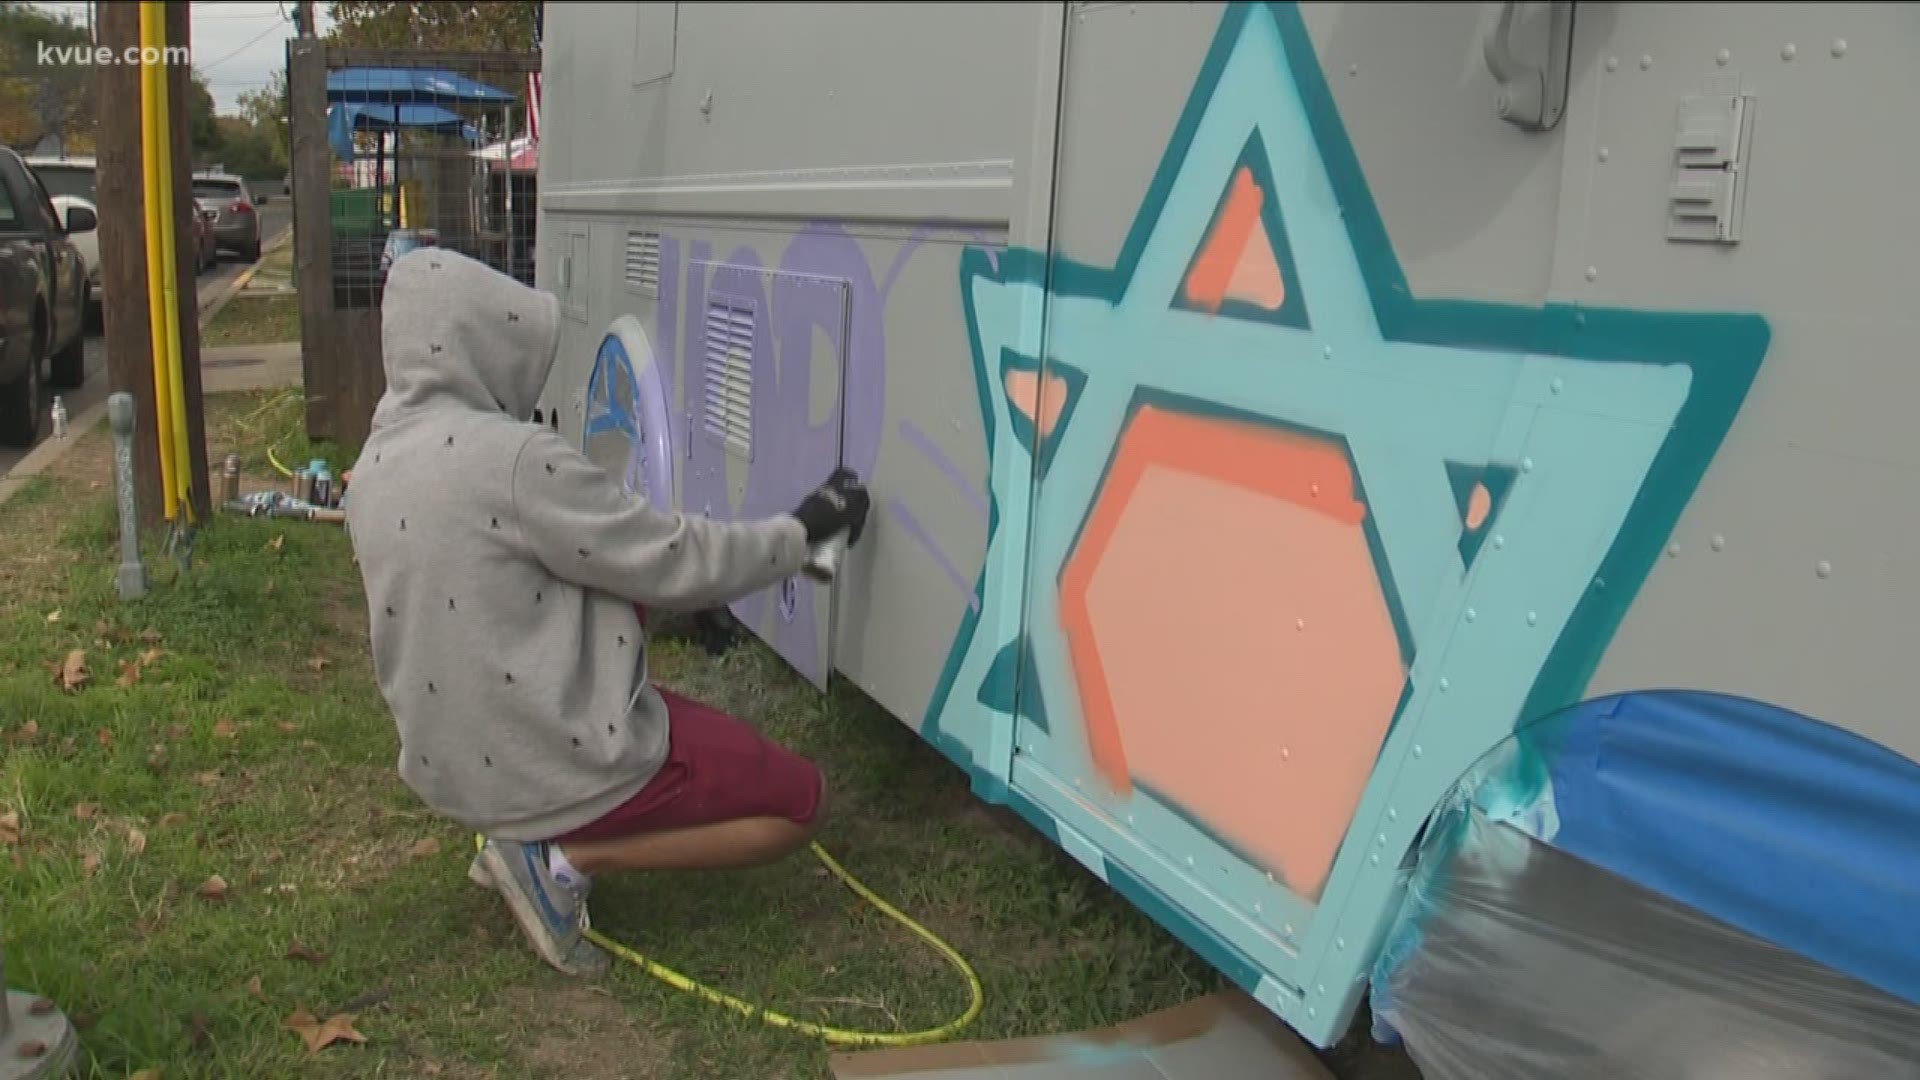 An Austin artist is giving a burglarized food truck a whole new look. Jew Hungry was broken into and ransacked earlier this month.
STORY: http://www.kvue.com/news/local/austin-artist-repaints-vandalized-jew-hungry-food-truck/617534948